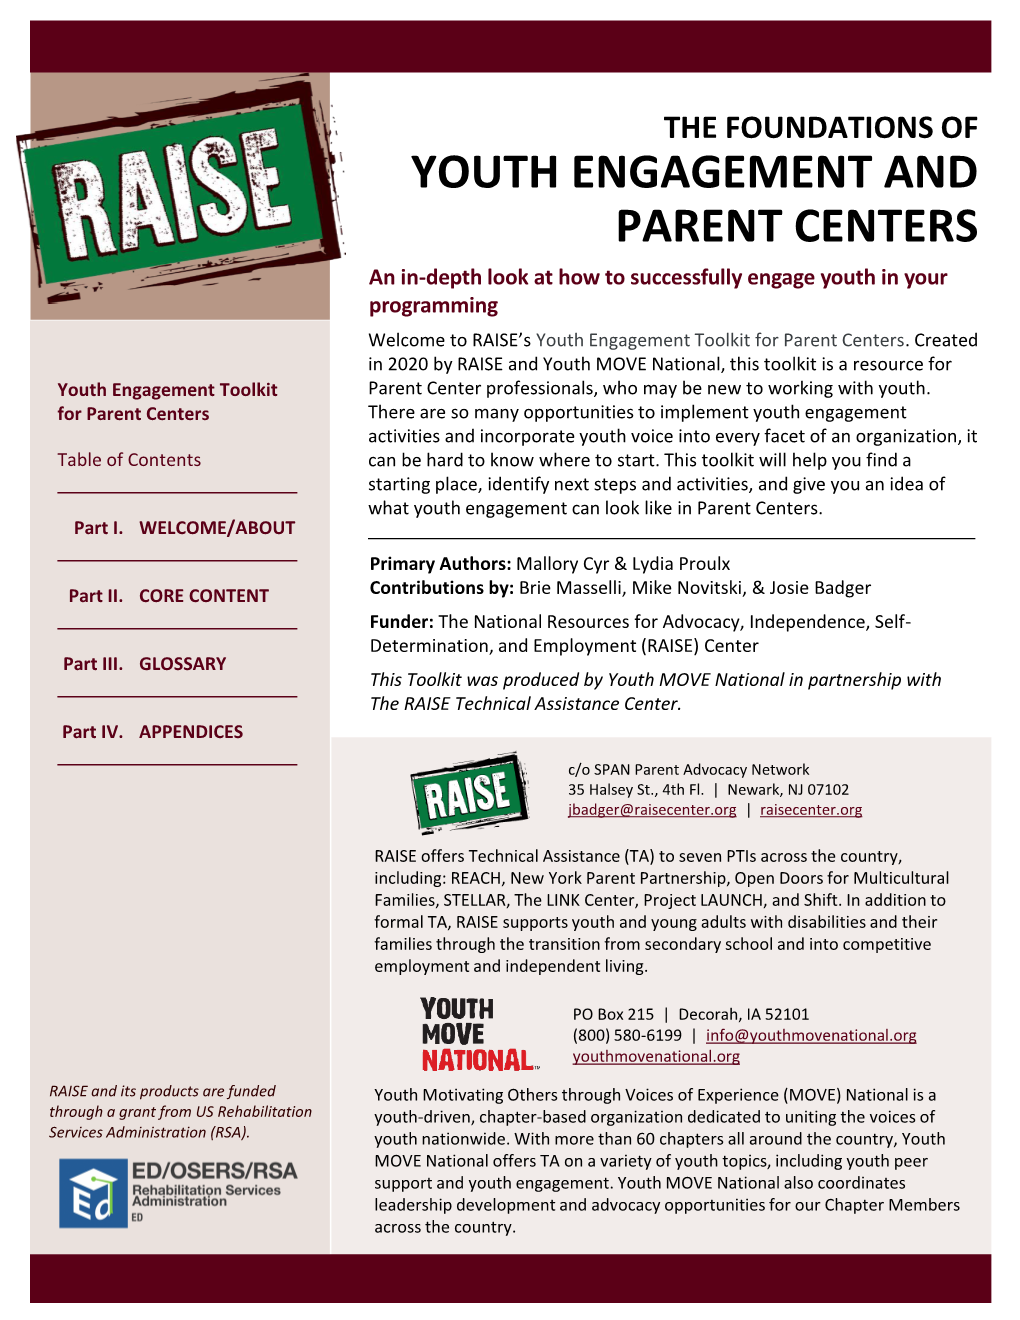 Youth Engagement Toolkit for Parent Centers